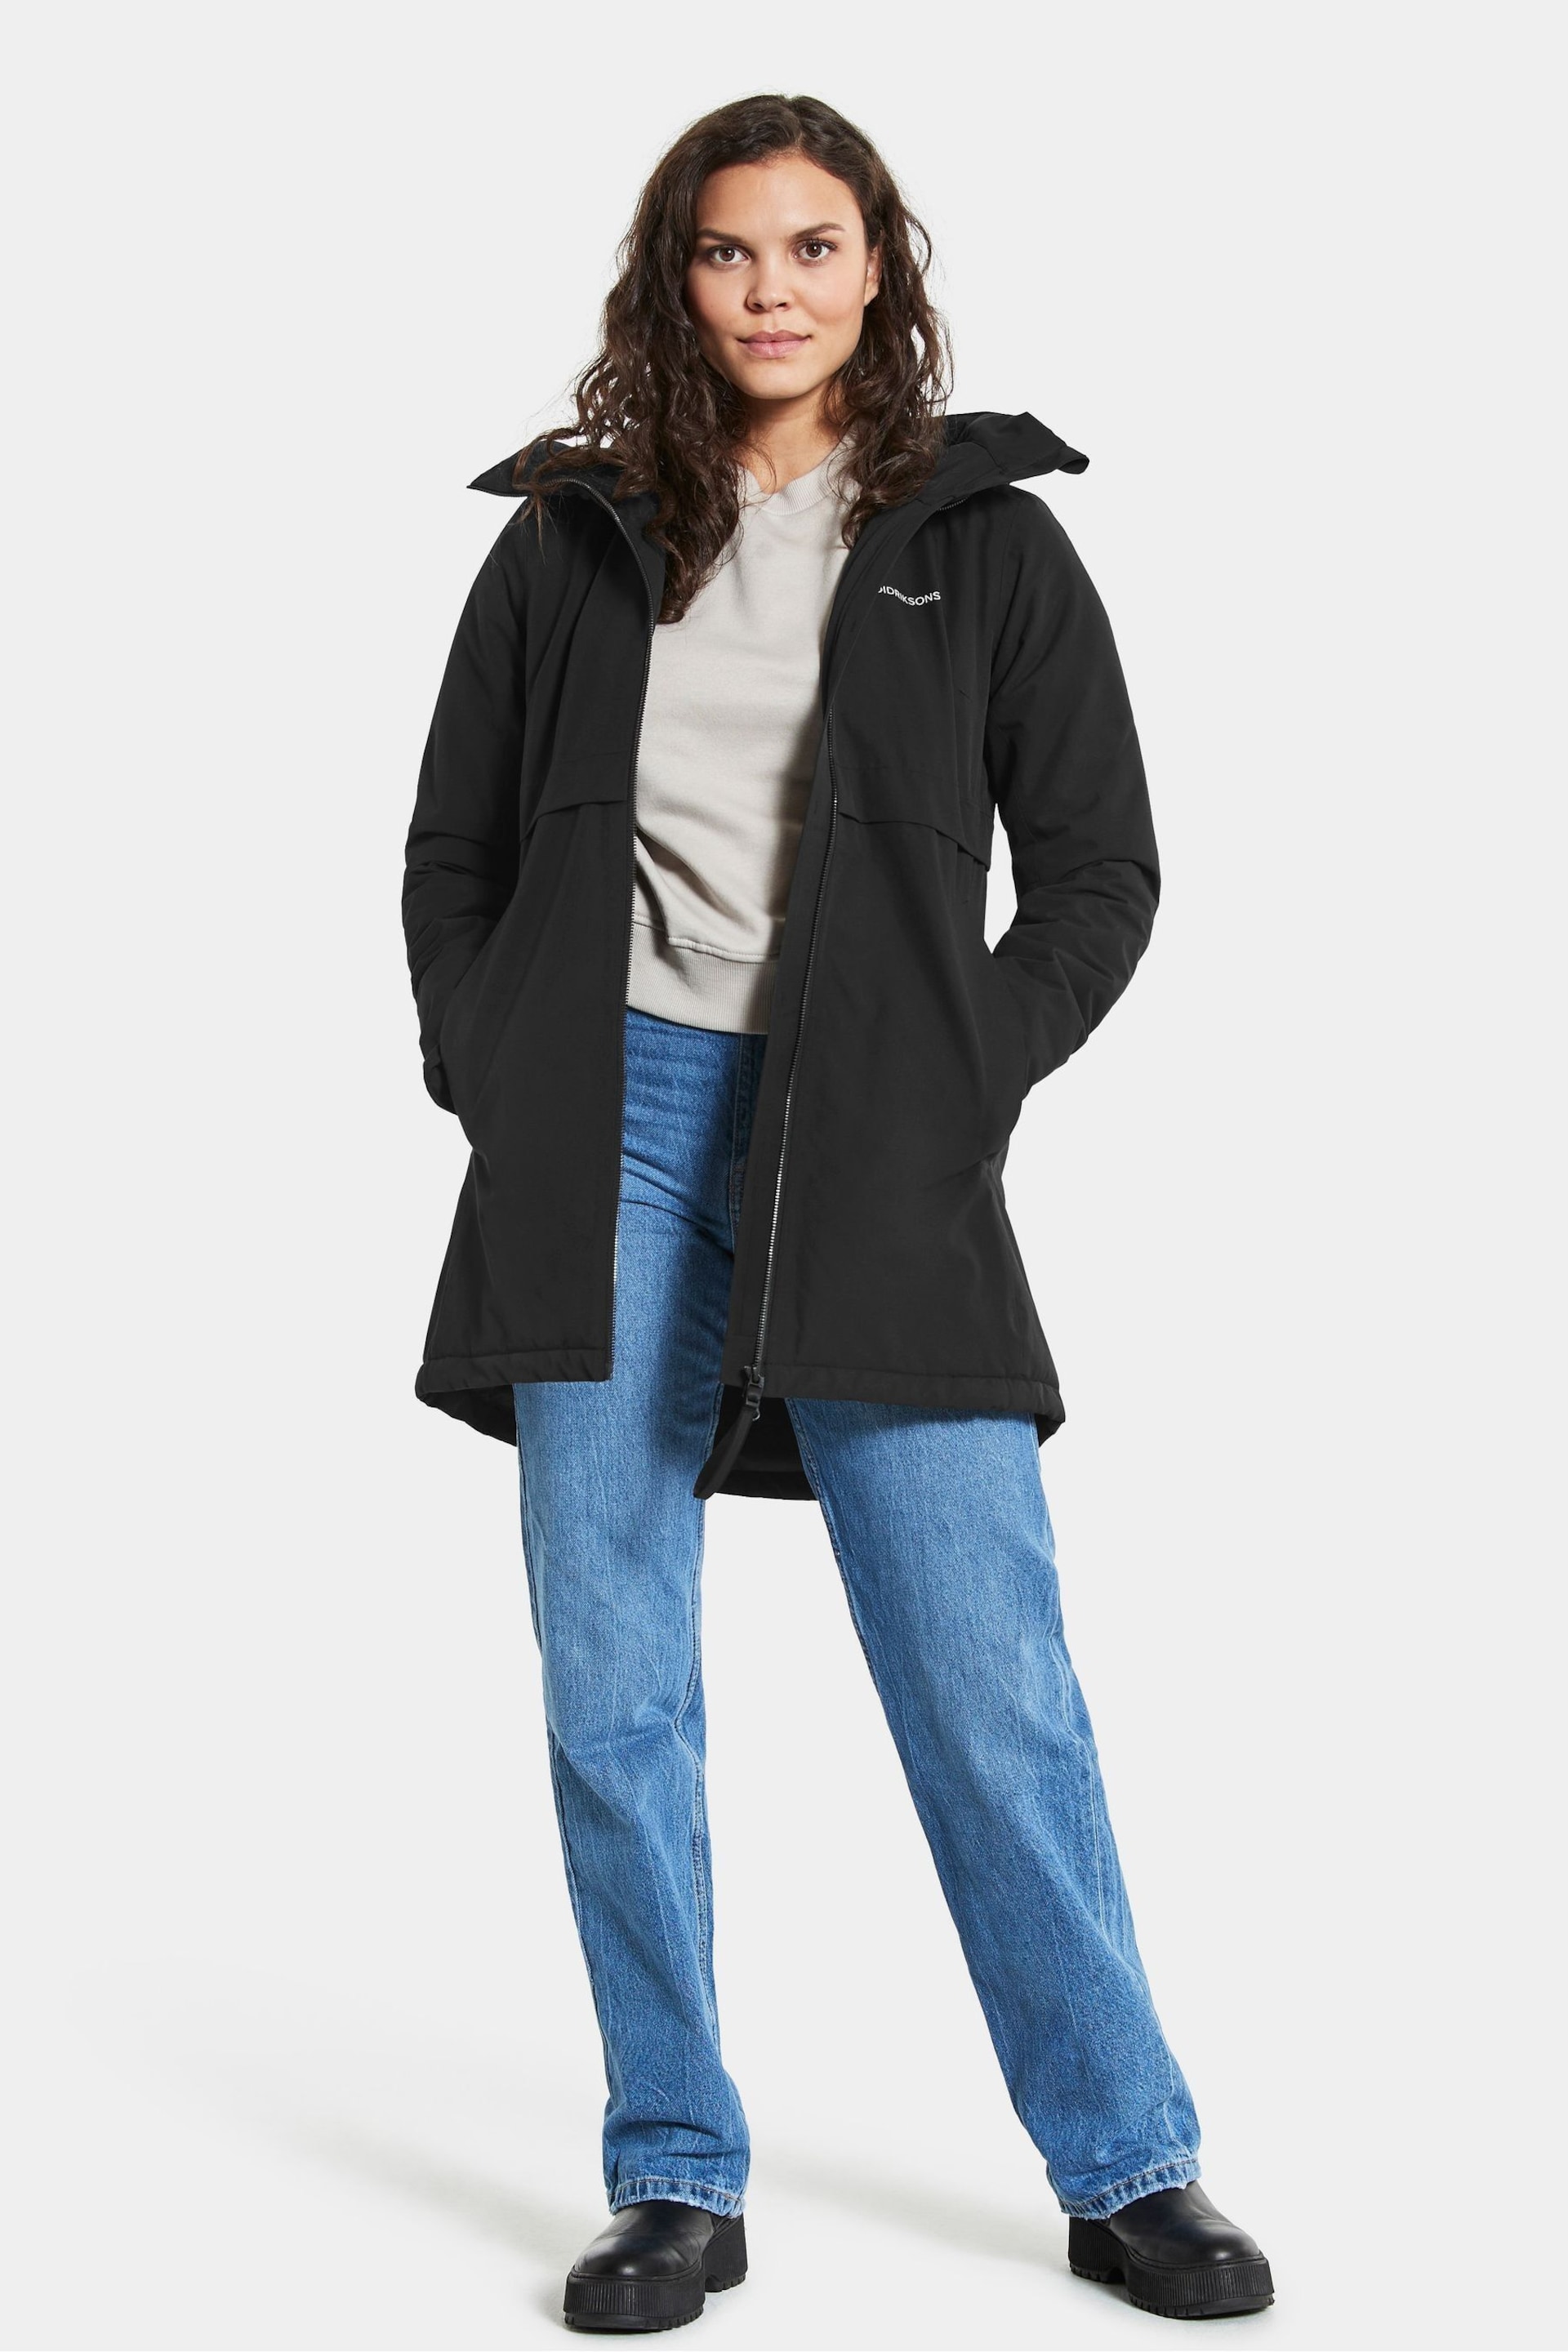 Didriksons Helle Wns Parka 5 Black Jacket - Image 4 of 5